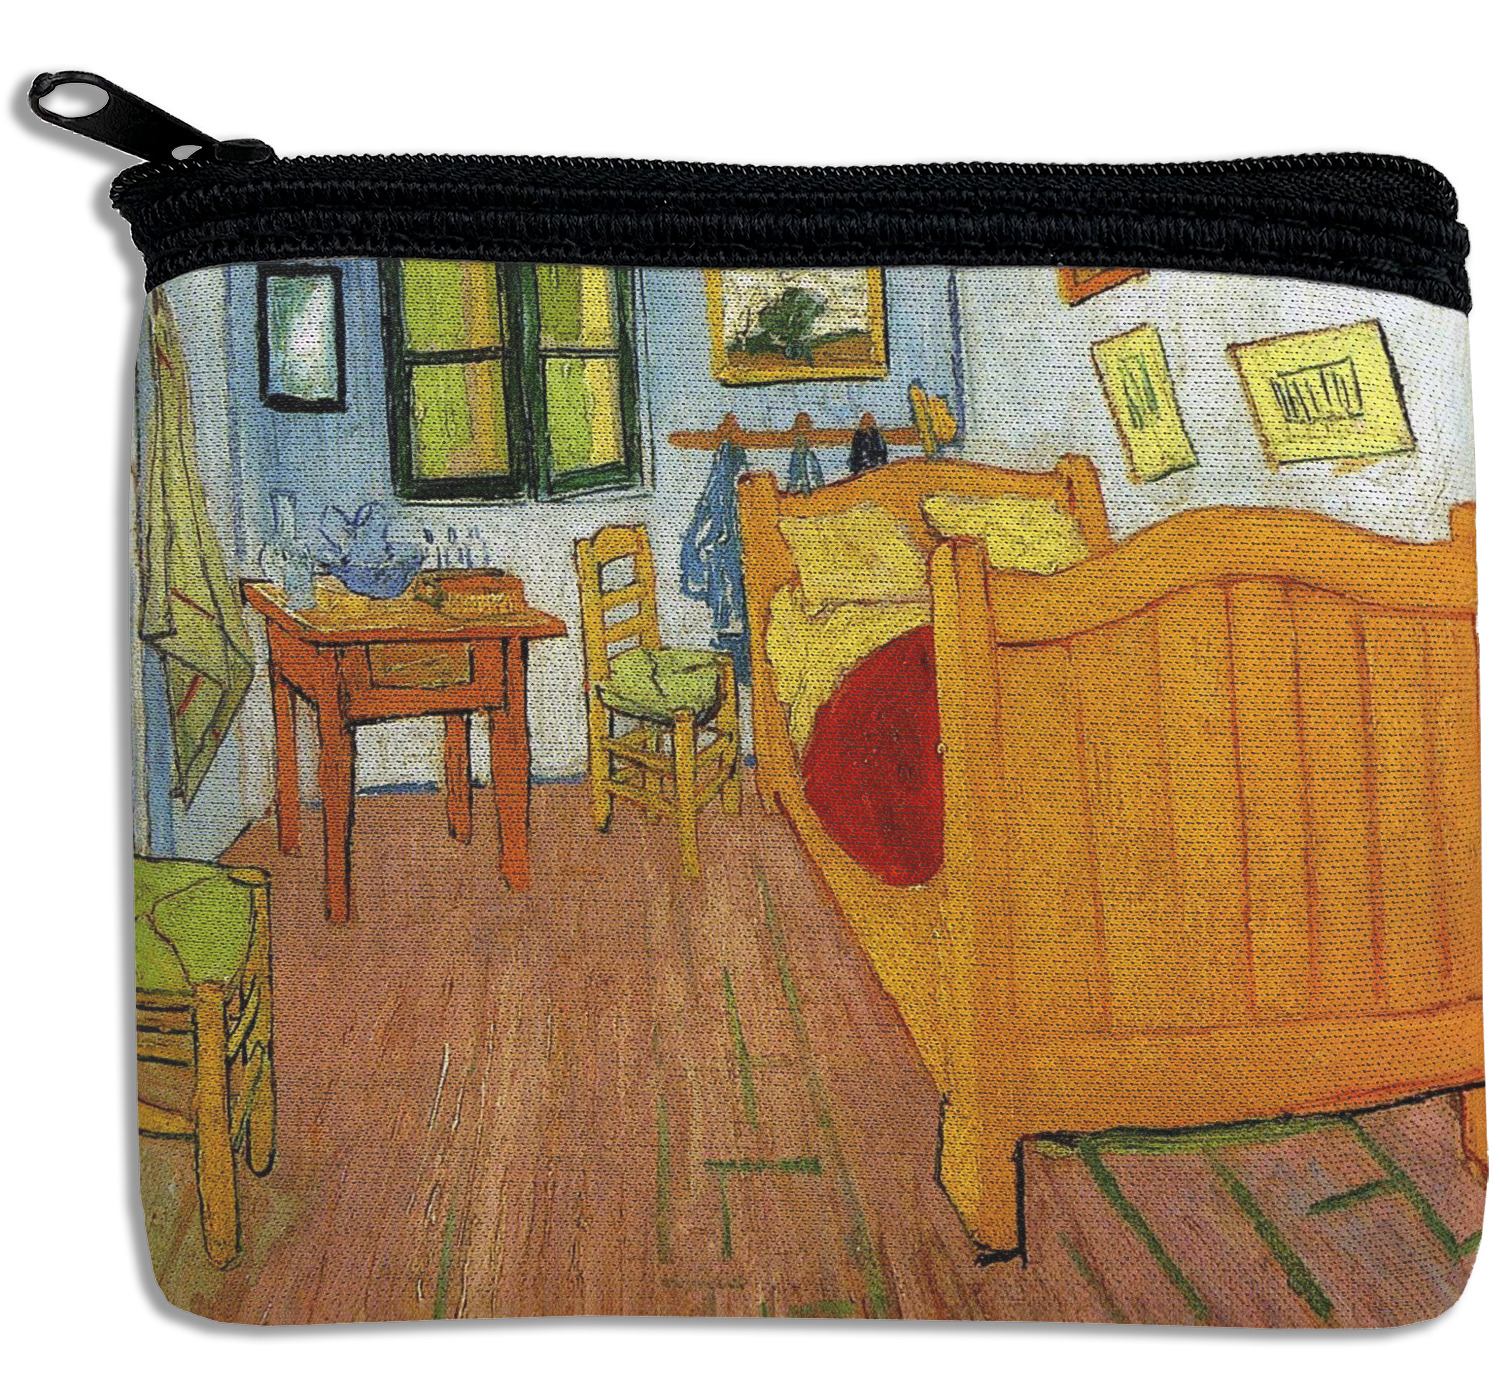 Envirosax Van Gogh Pouch Reusable Bag Polyester Shopping Grocery Bags Set  of 5 Foldable Water Resistant : Amazon.in: Bags, Wallets and Luggage